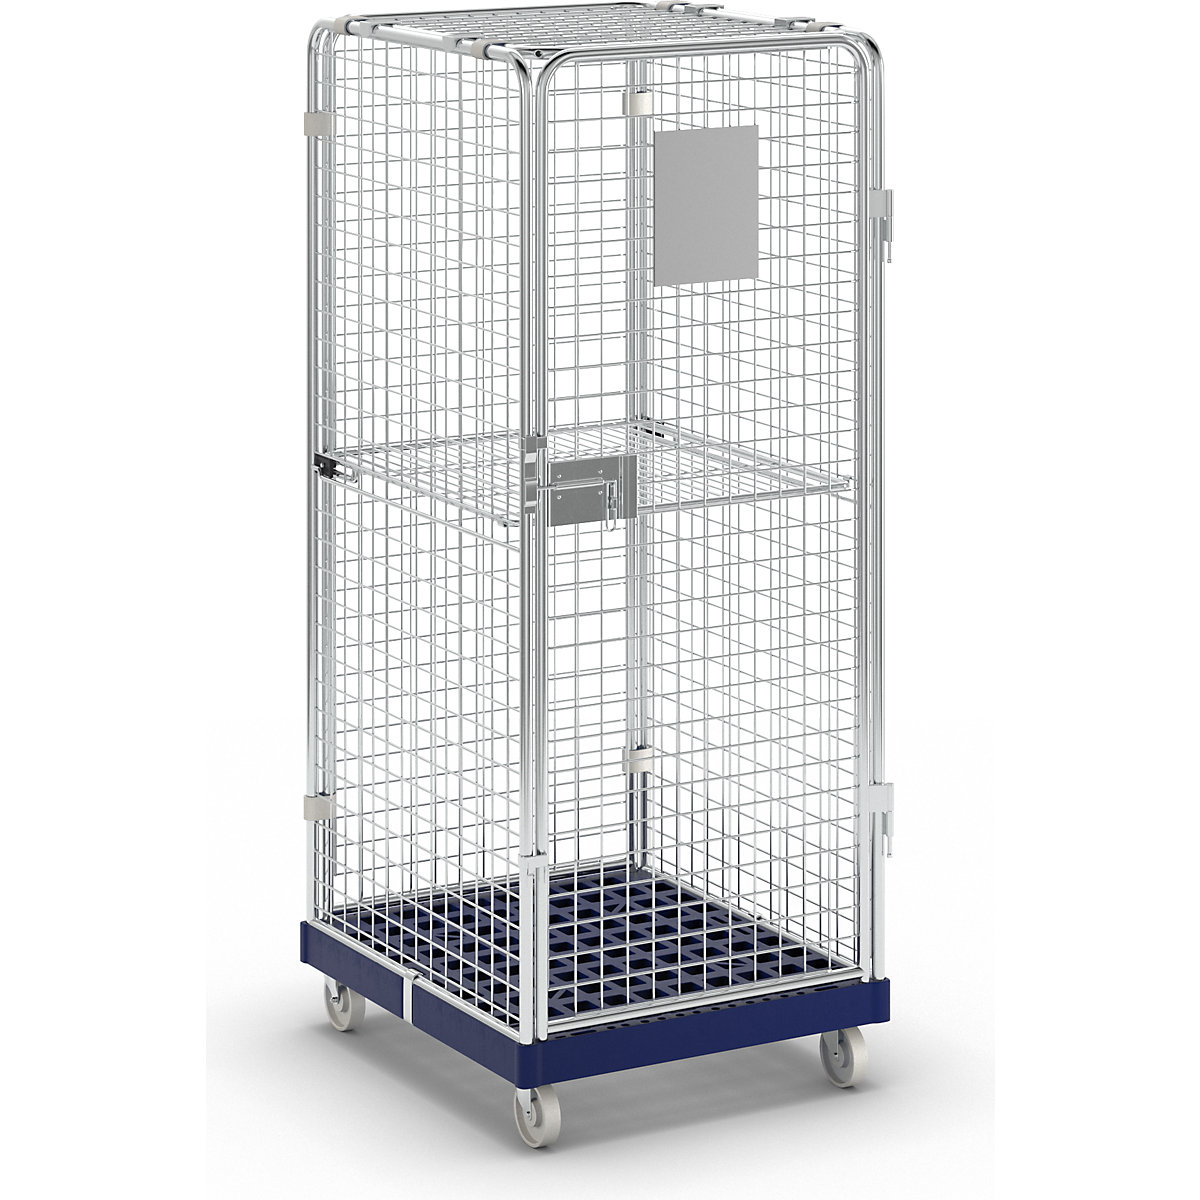 Security roll container with plastic dolly